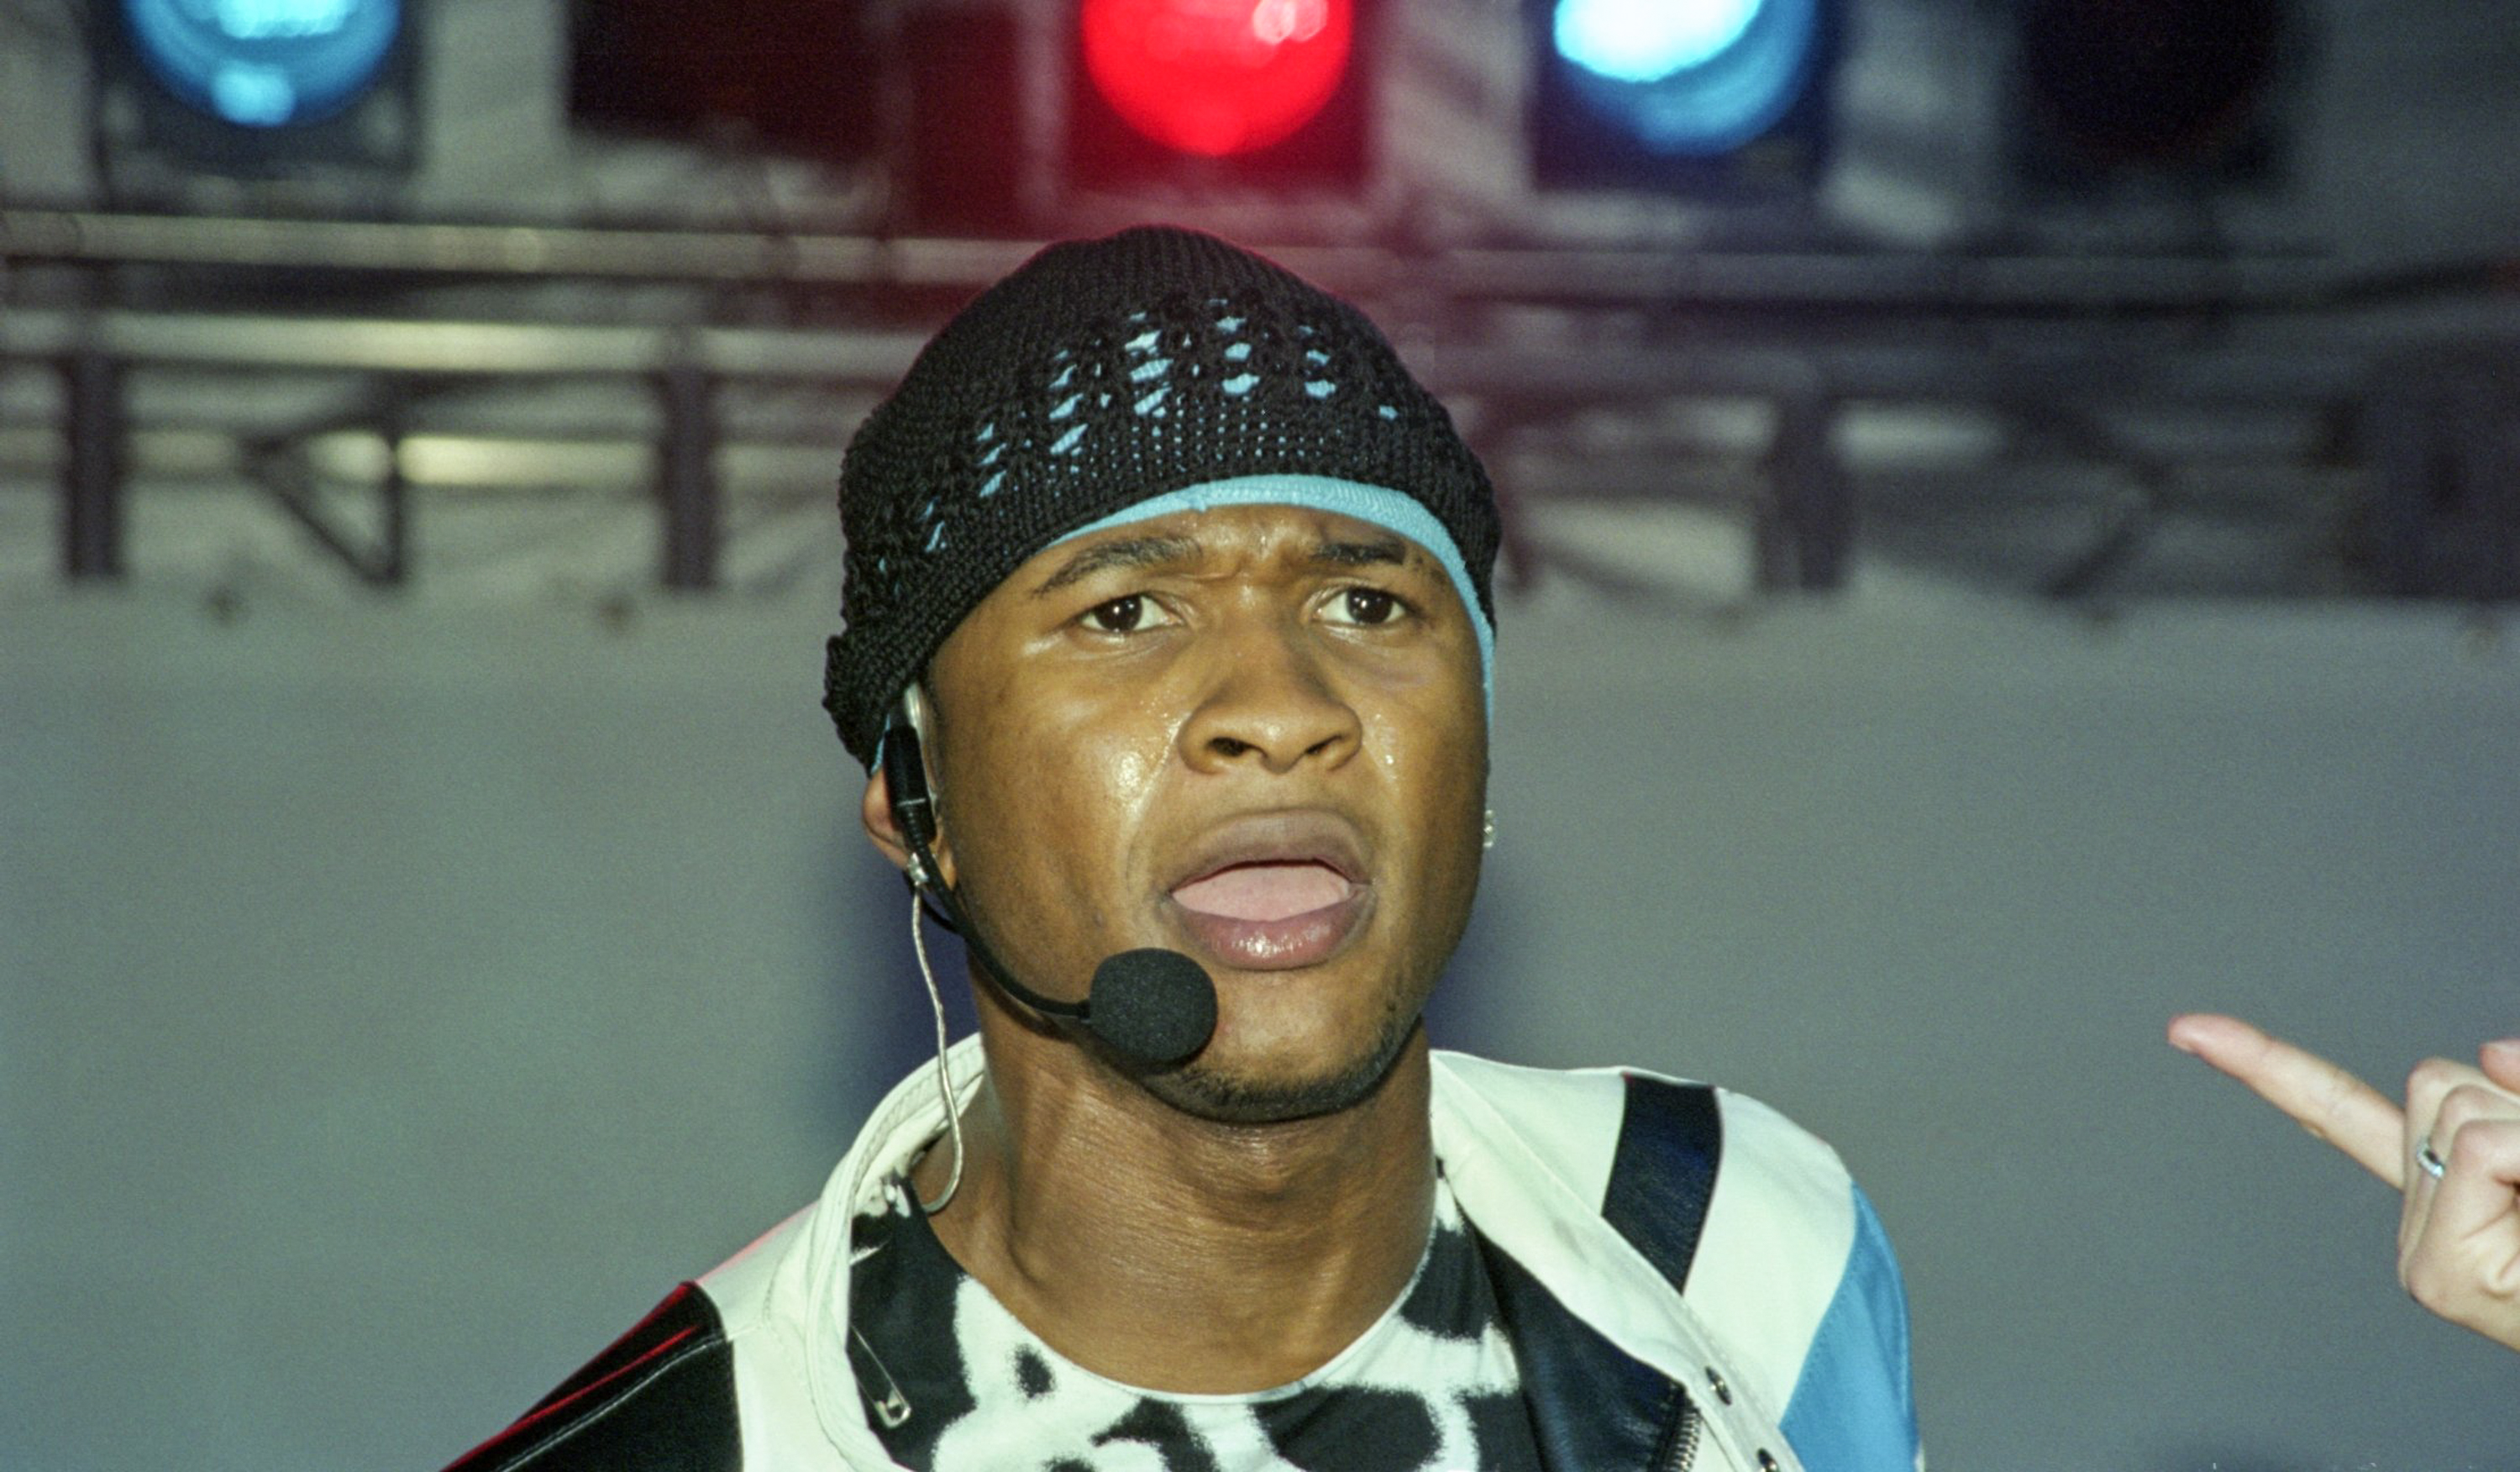 Usher performs at the 20th annual CFDA American Fashion Awards on June 14, 2001 in New York City | Source: Getty Images